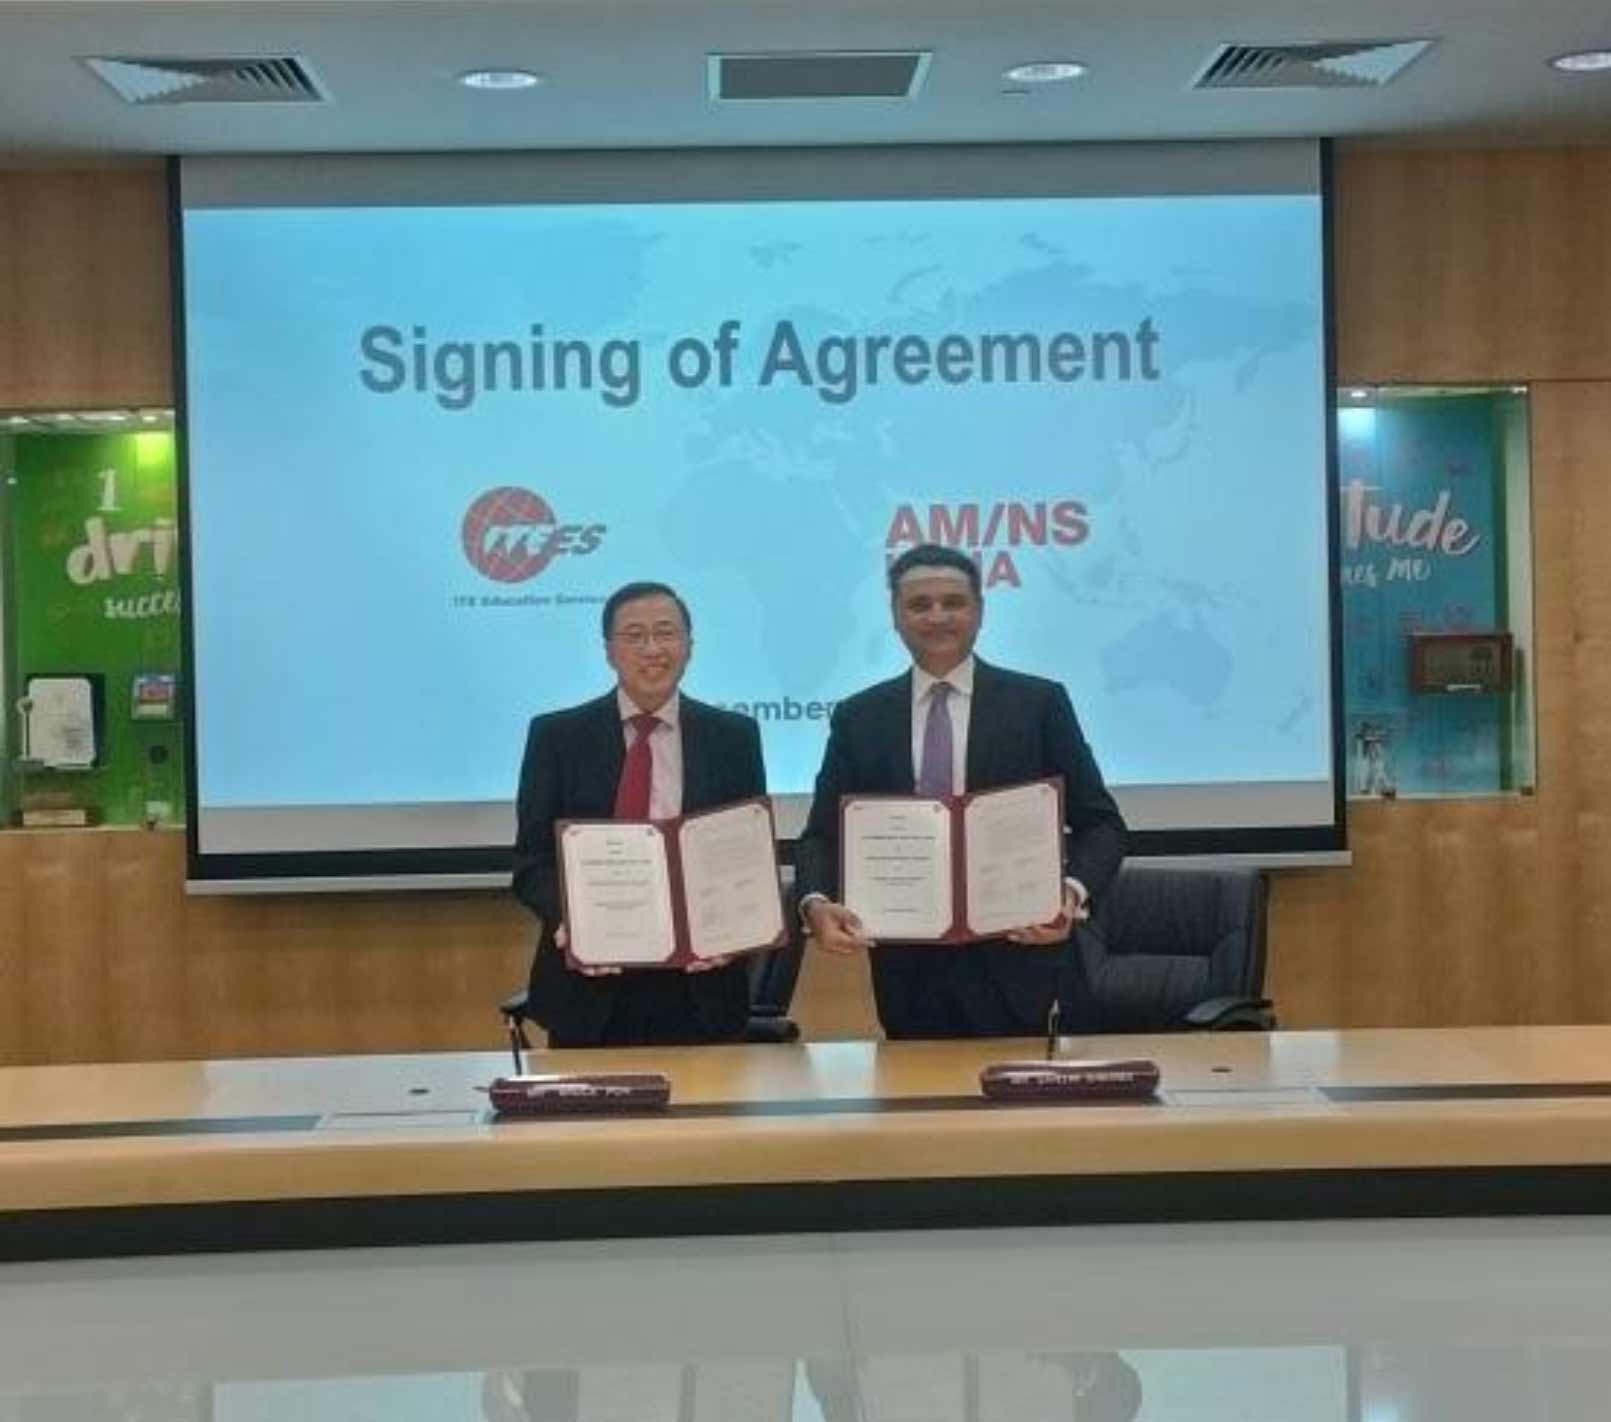 MoU signing with ITE Singapore